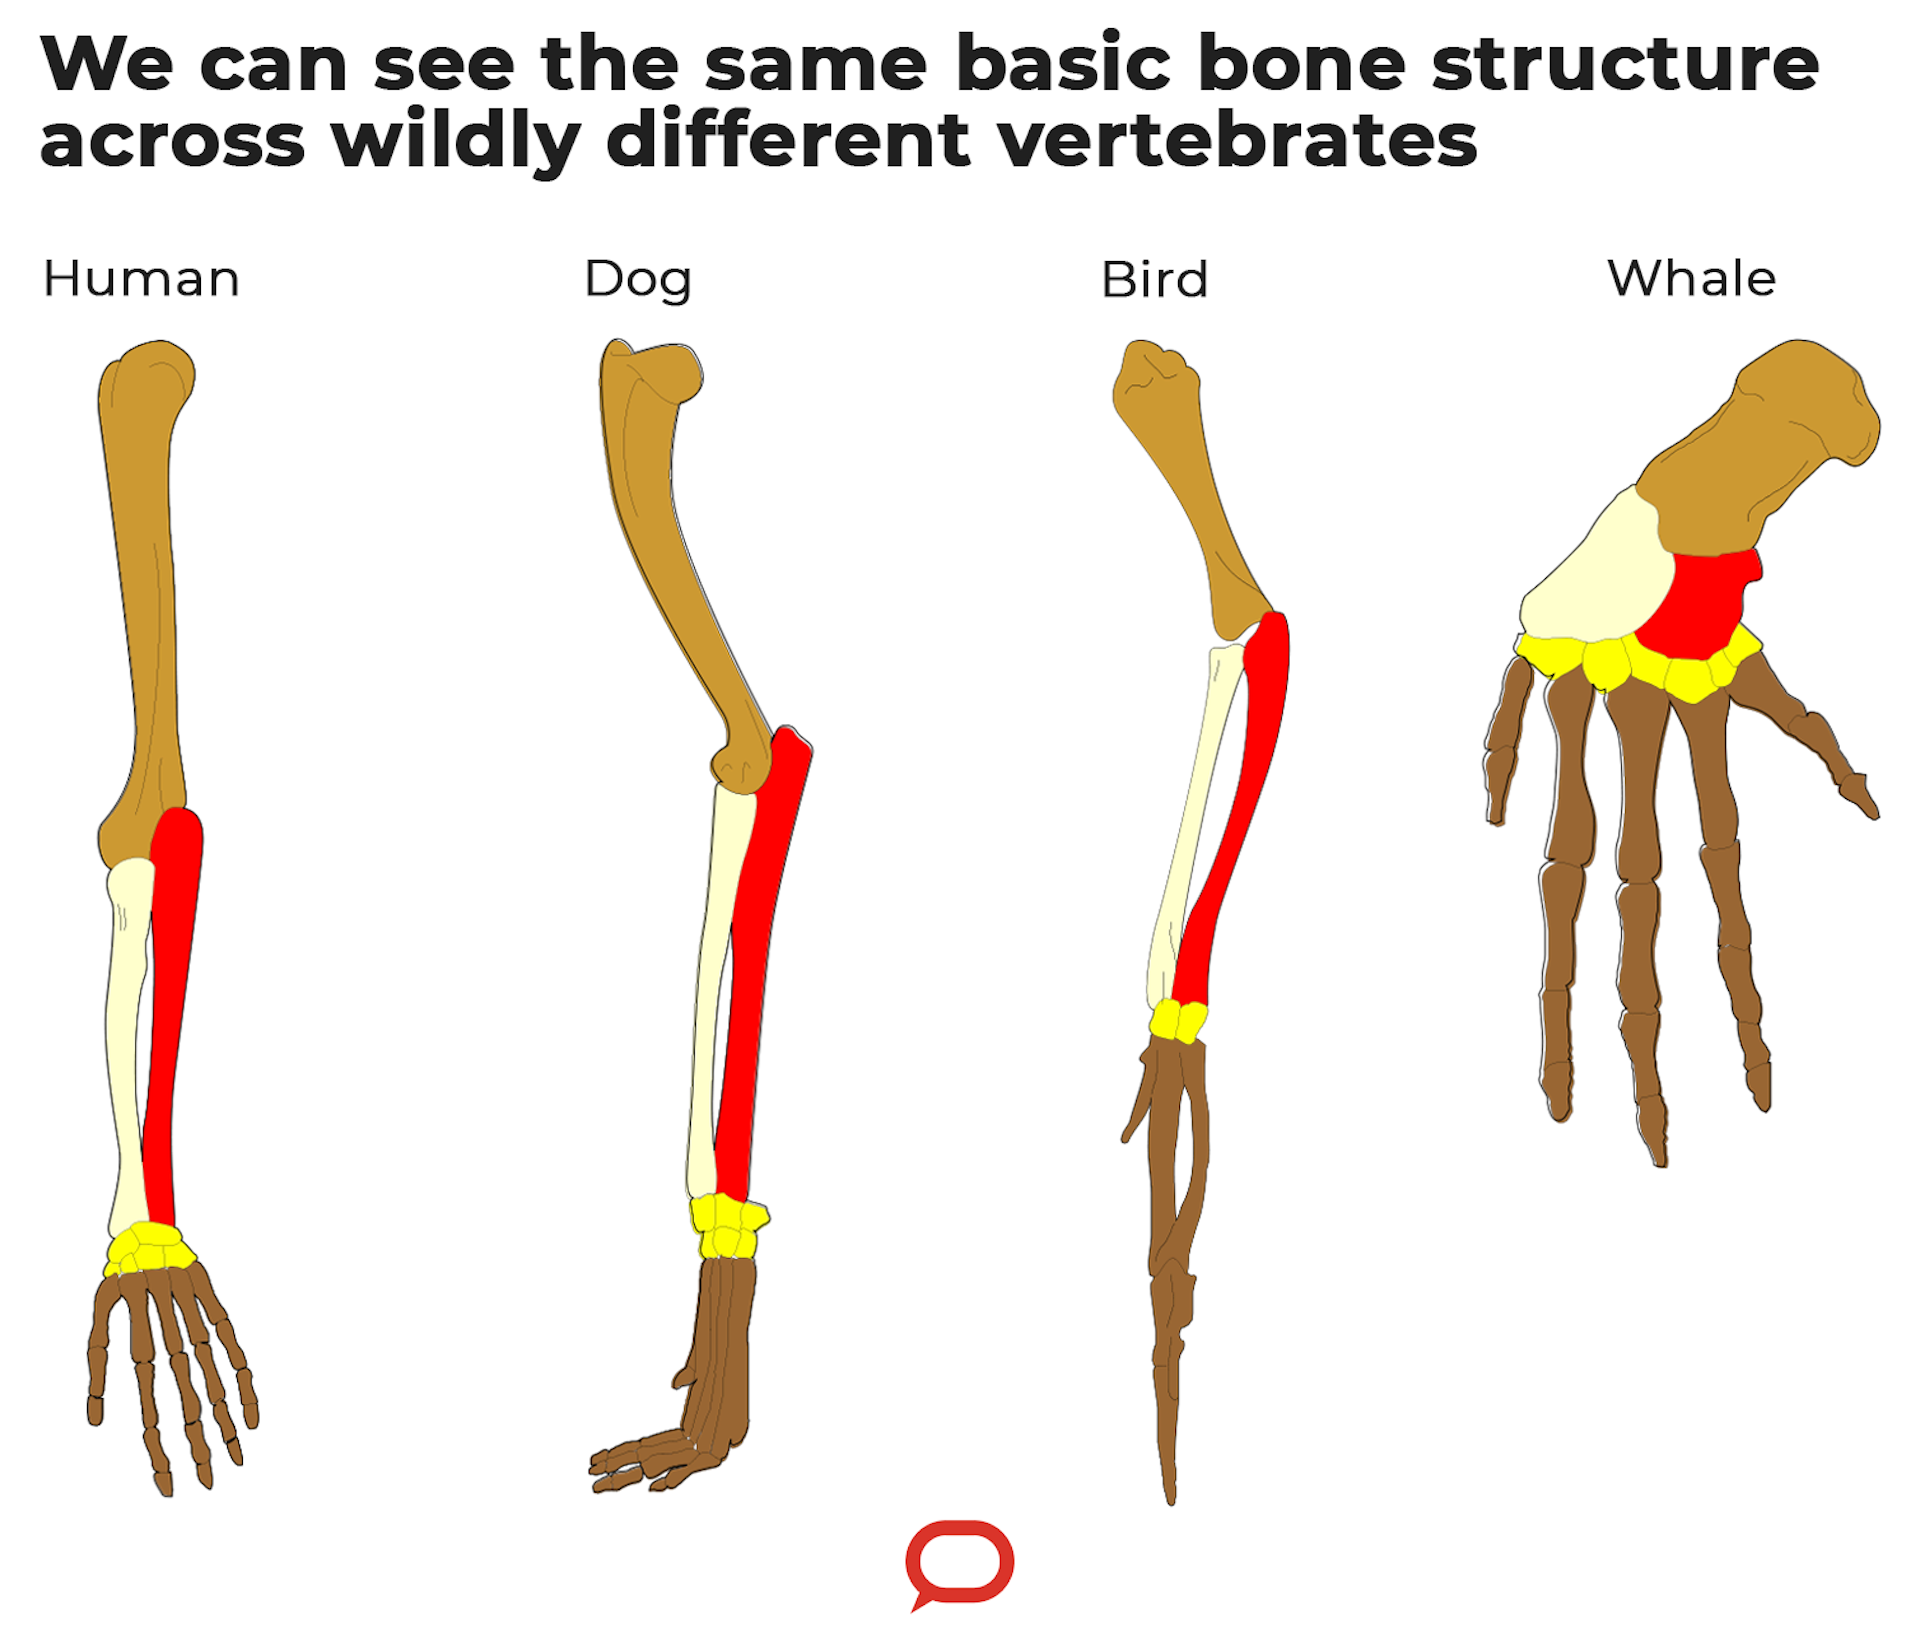 A graphic showing three shared bone structures across humans, dogs, birds and whales.